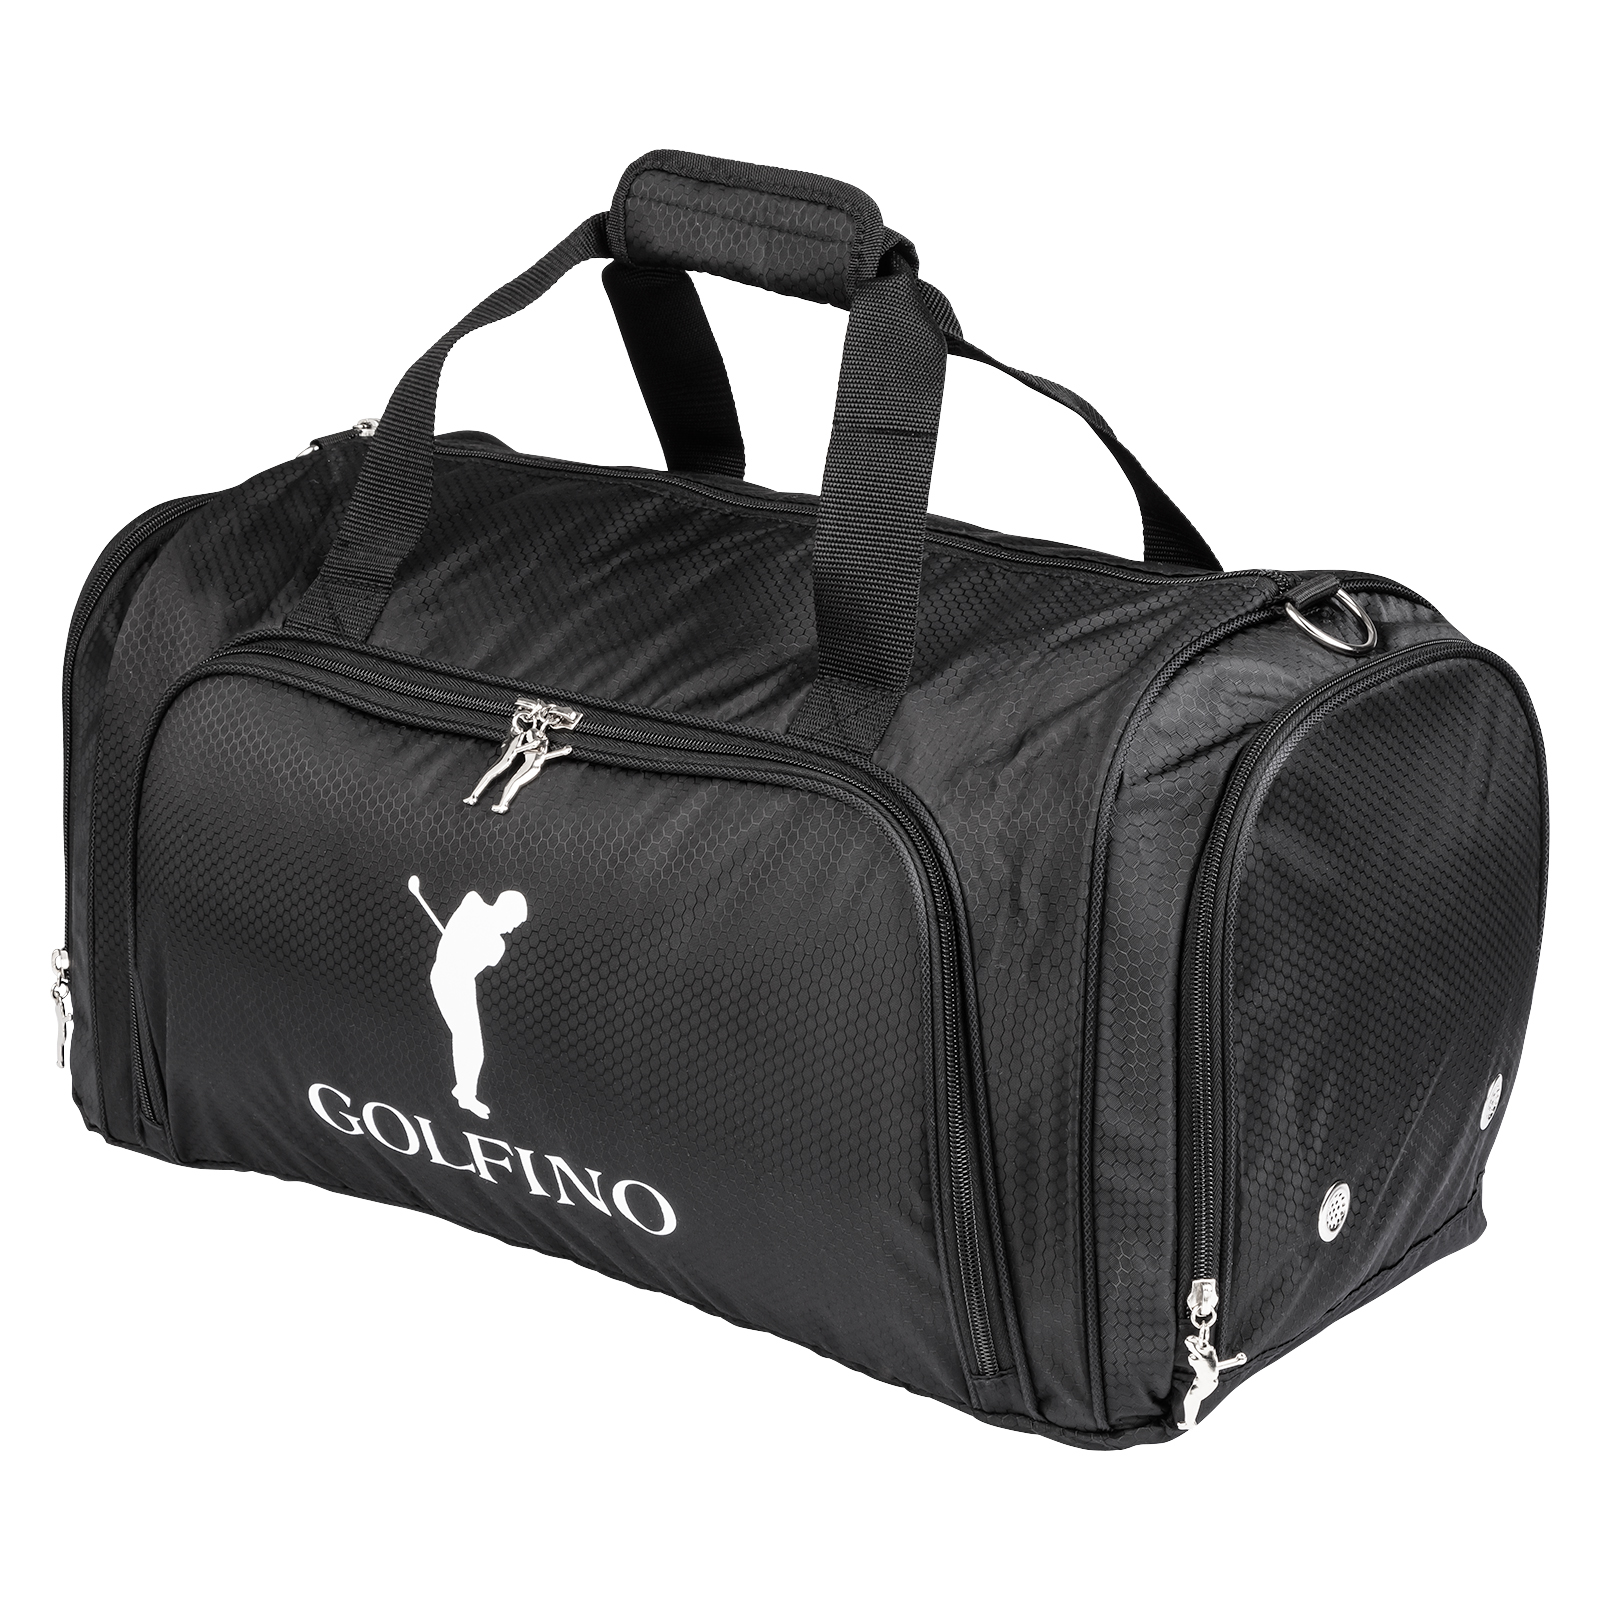 Spacious golf sports bag with various carrying options.